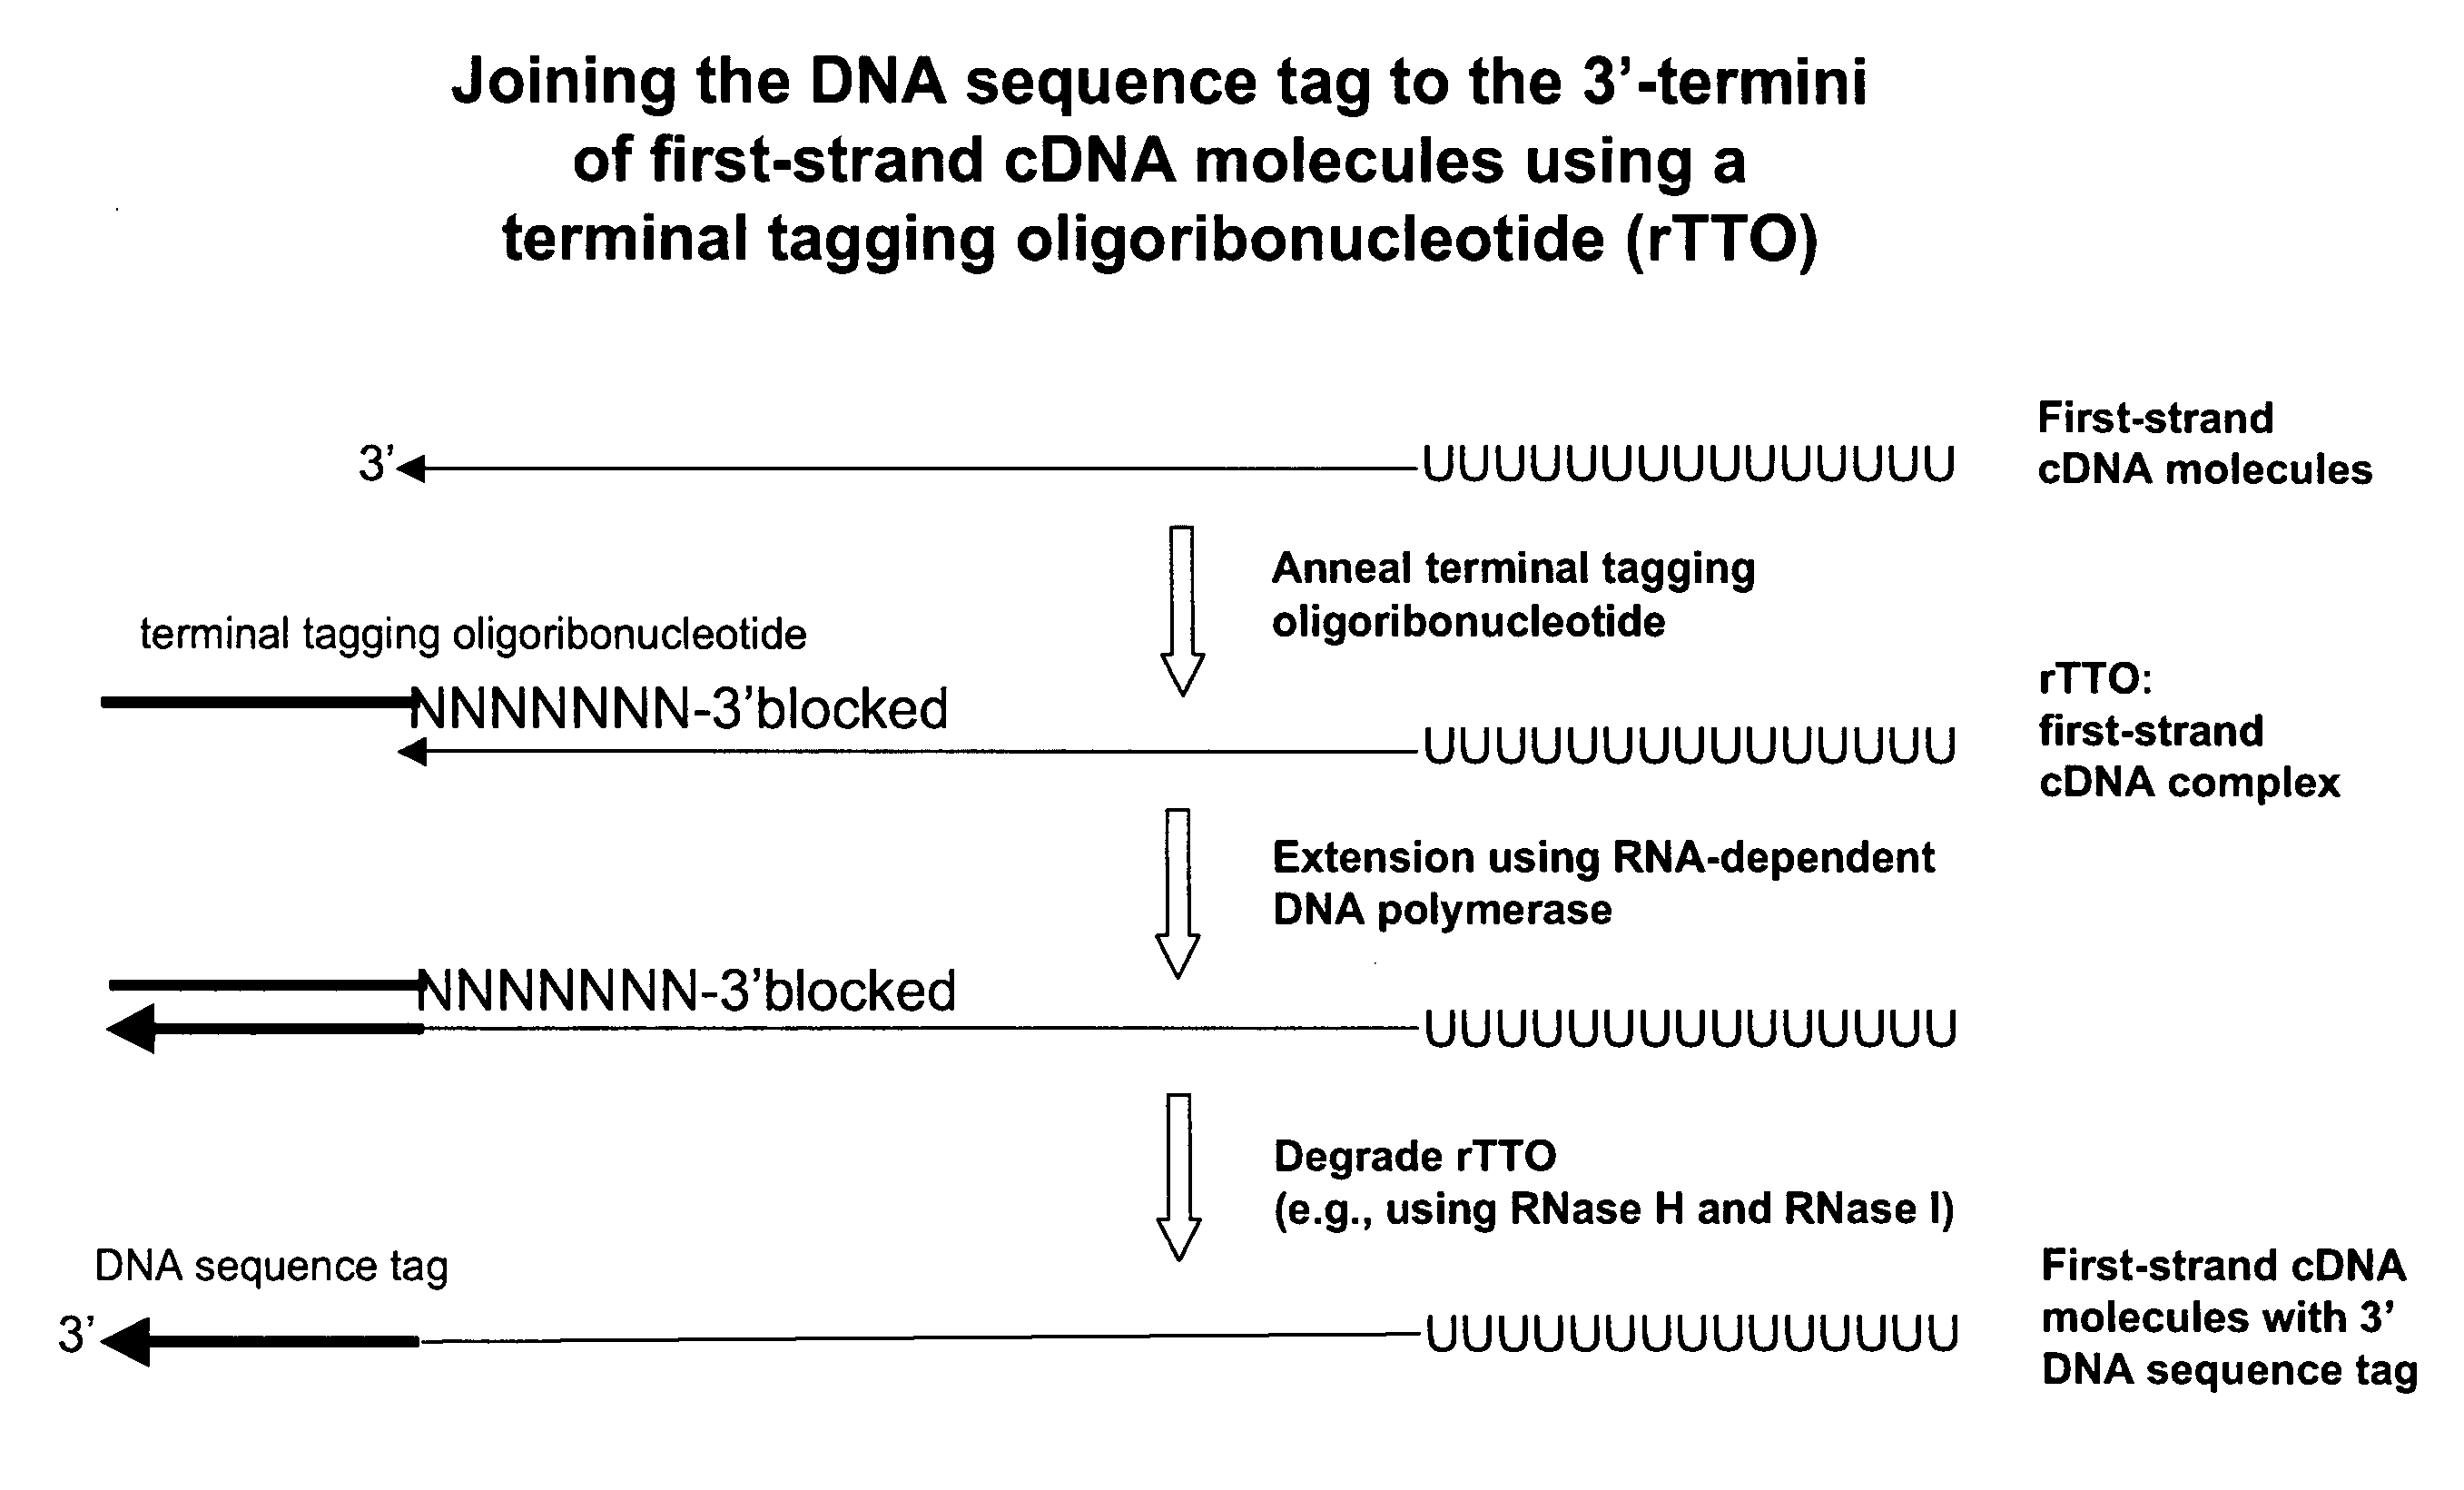 Synthesis of tagged nucleic acids